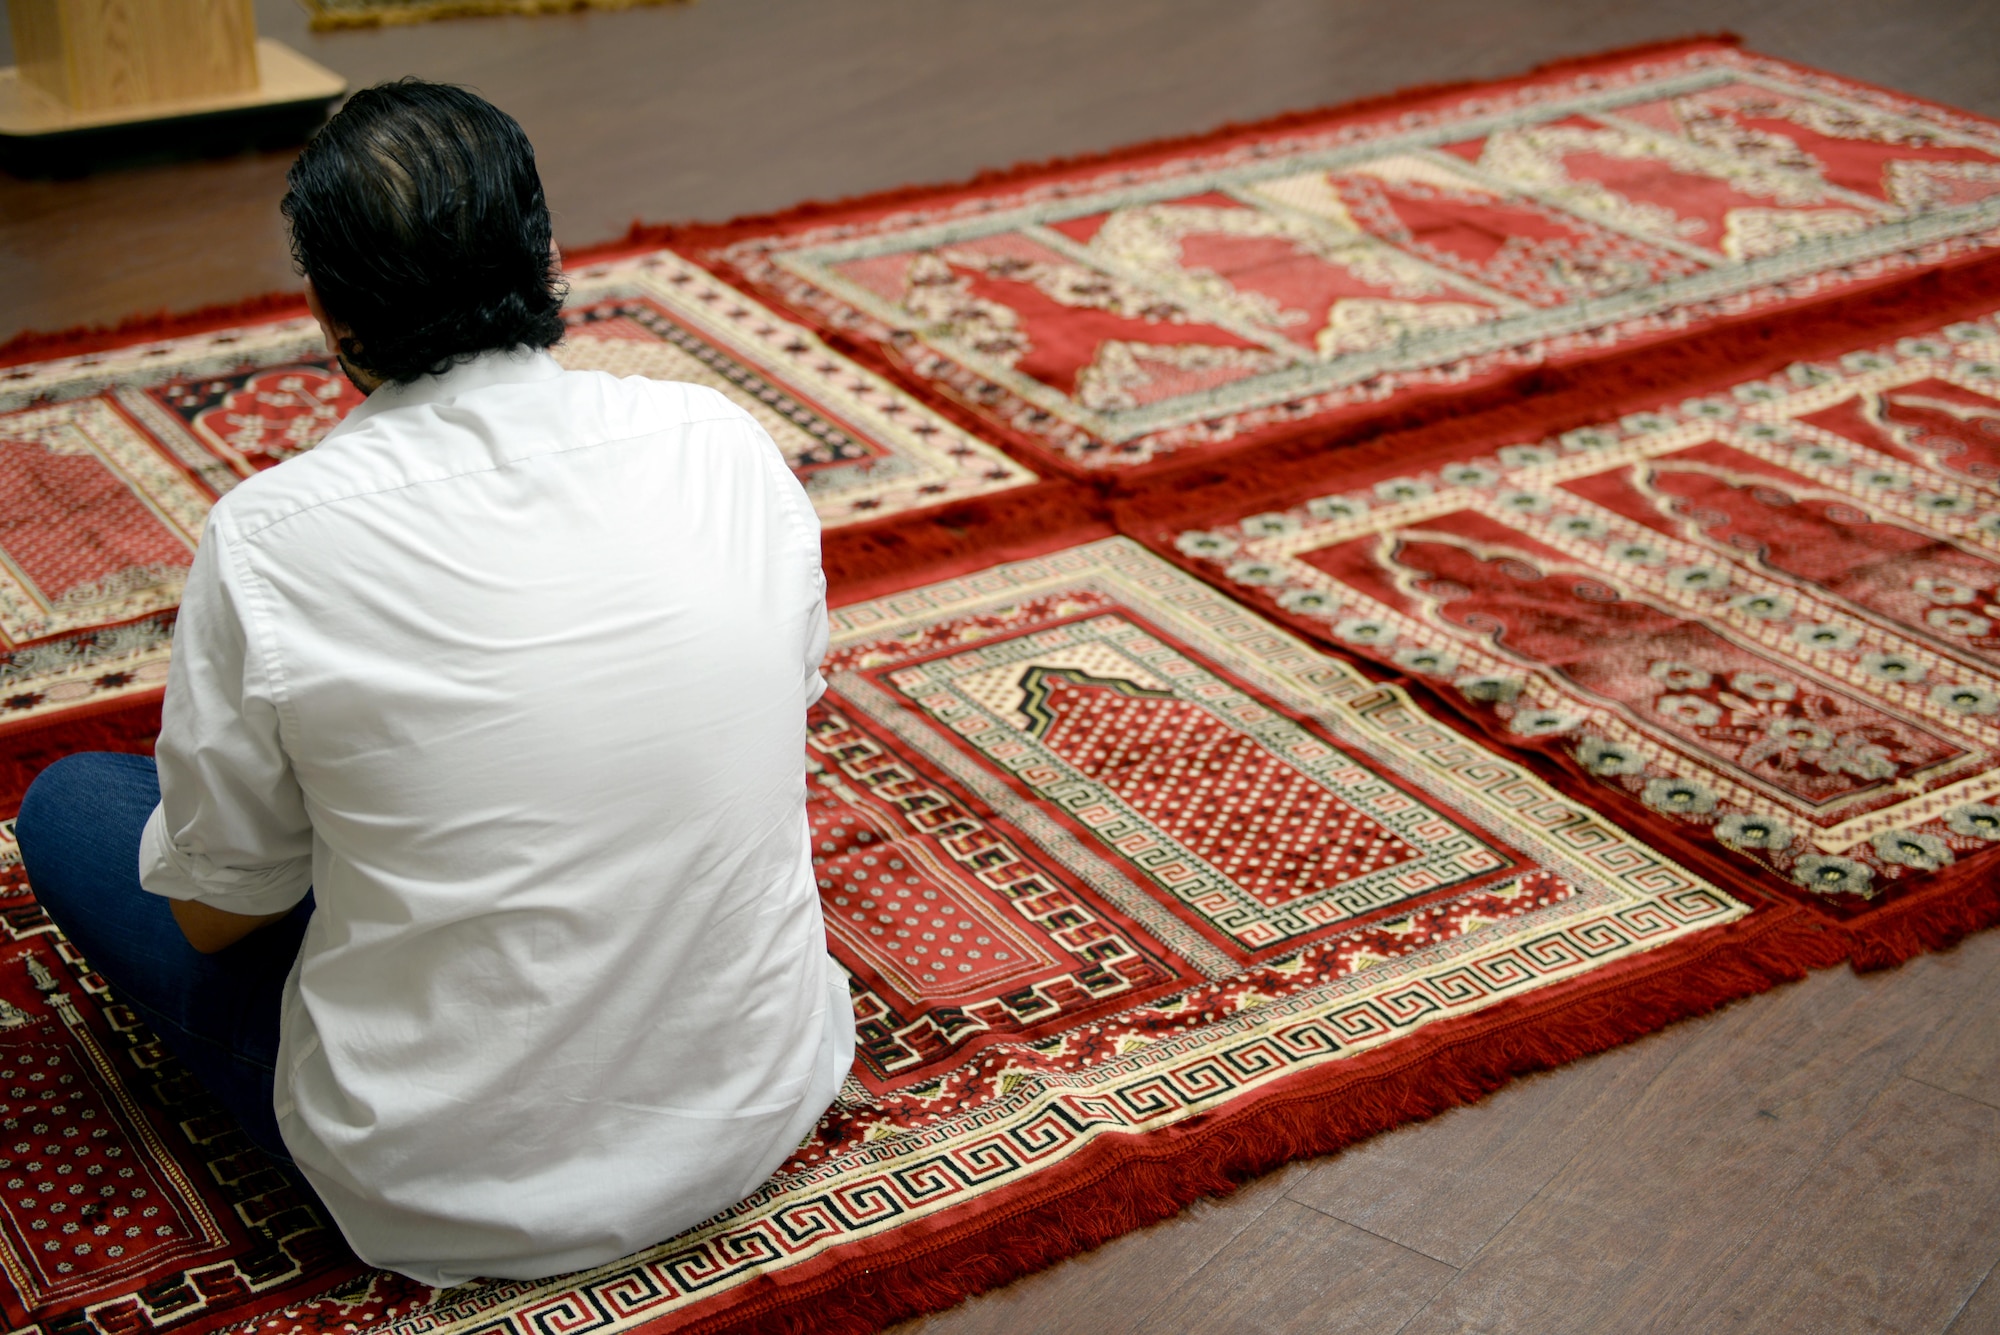 A man sits in prayer before the first Muslim religious service offered on Maxwell Air Force Base, Ala., July 29, 2016. The Muslim worship service will take place every other Friday beginning Aug. 5, at 12:30 p.m. and is open to all individuals with base access. (U.S. Air Force photo/Senior Airman Tammie Ramsouer)